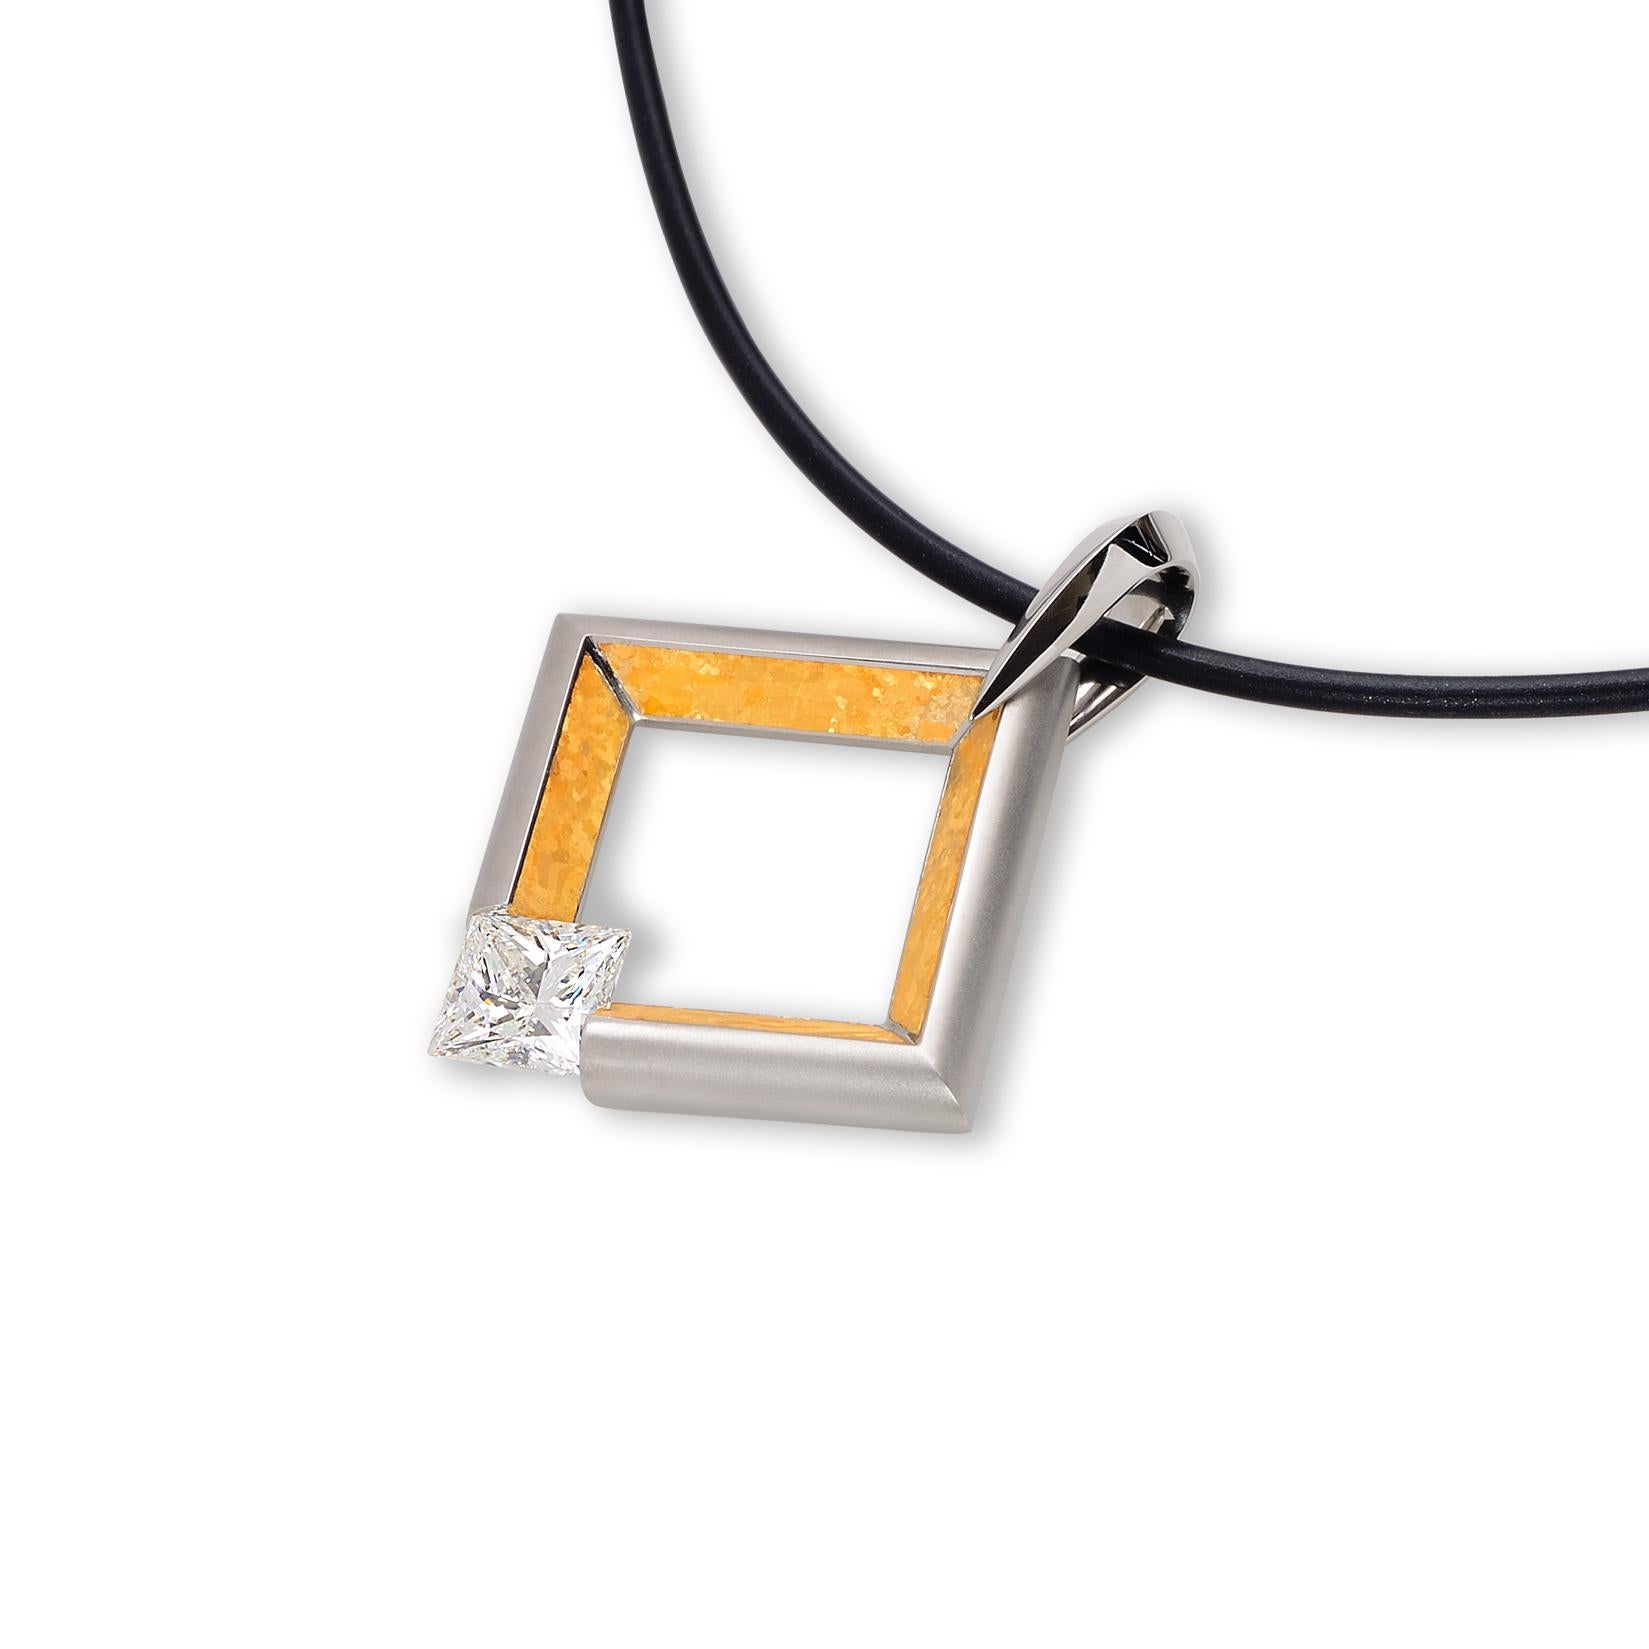 The Steven Kretchmer Large Square Pendant is crafted in our patented matte platinum with a 24K crystallized yellow gold inlay.  The pendant features a 2.03 ct. J/VS1 princess cut diamond tension-set right in the center. The bail of the pendant is